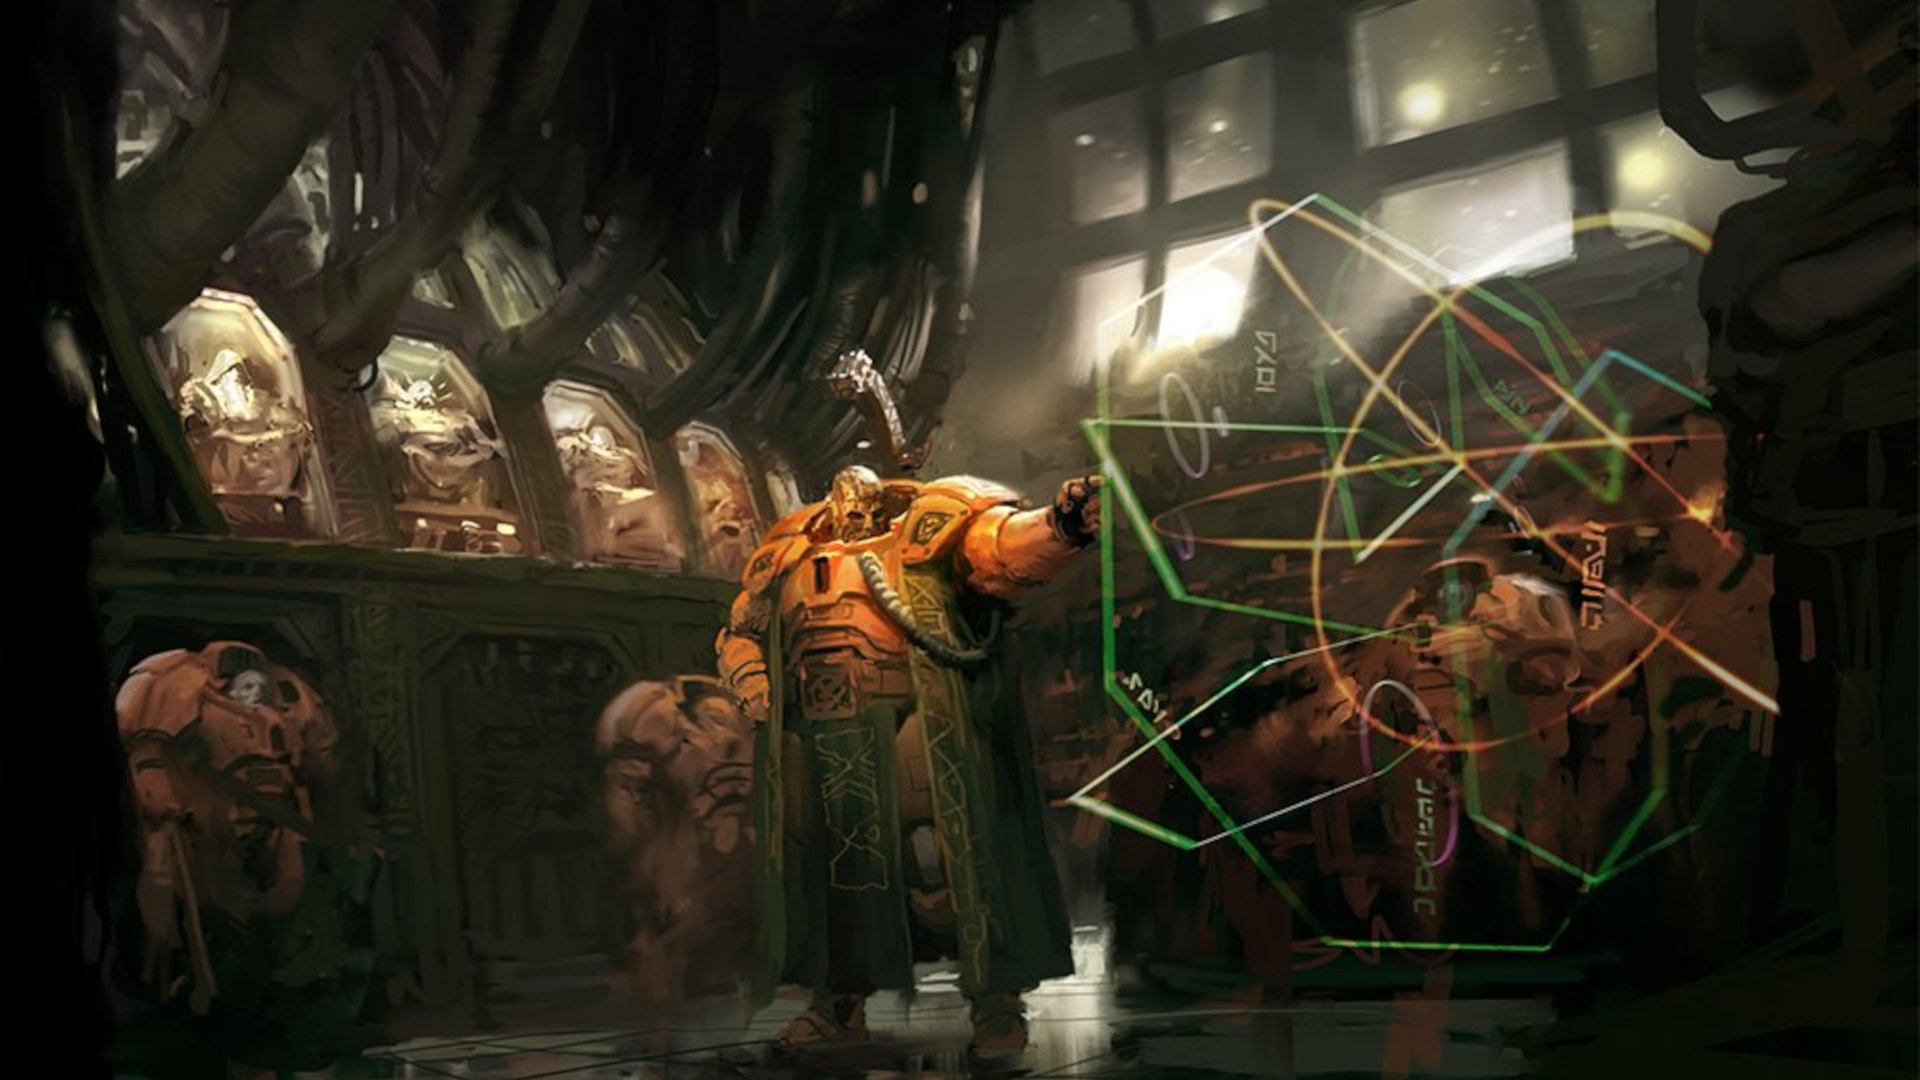 Warhammer 40k Leagues of Votann guide - Games Workshop artwork showing a Kahl of the Kin interfacing with a hologram